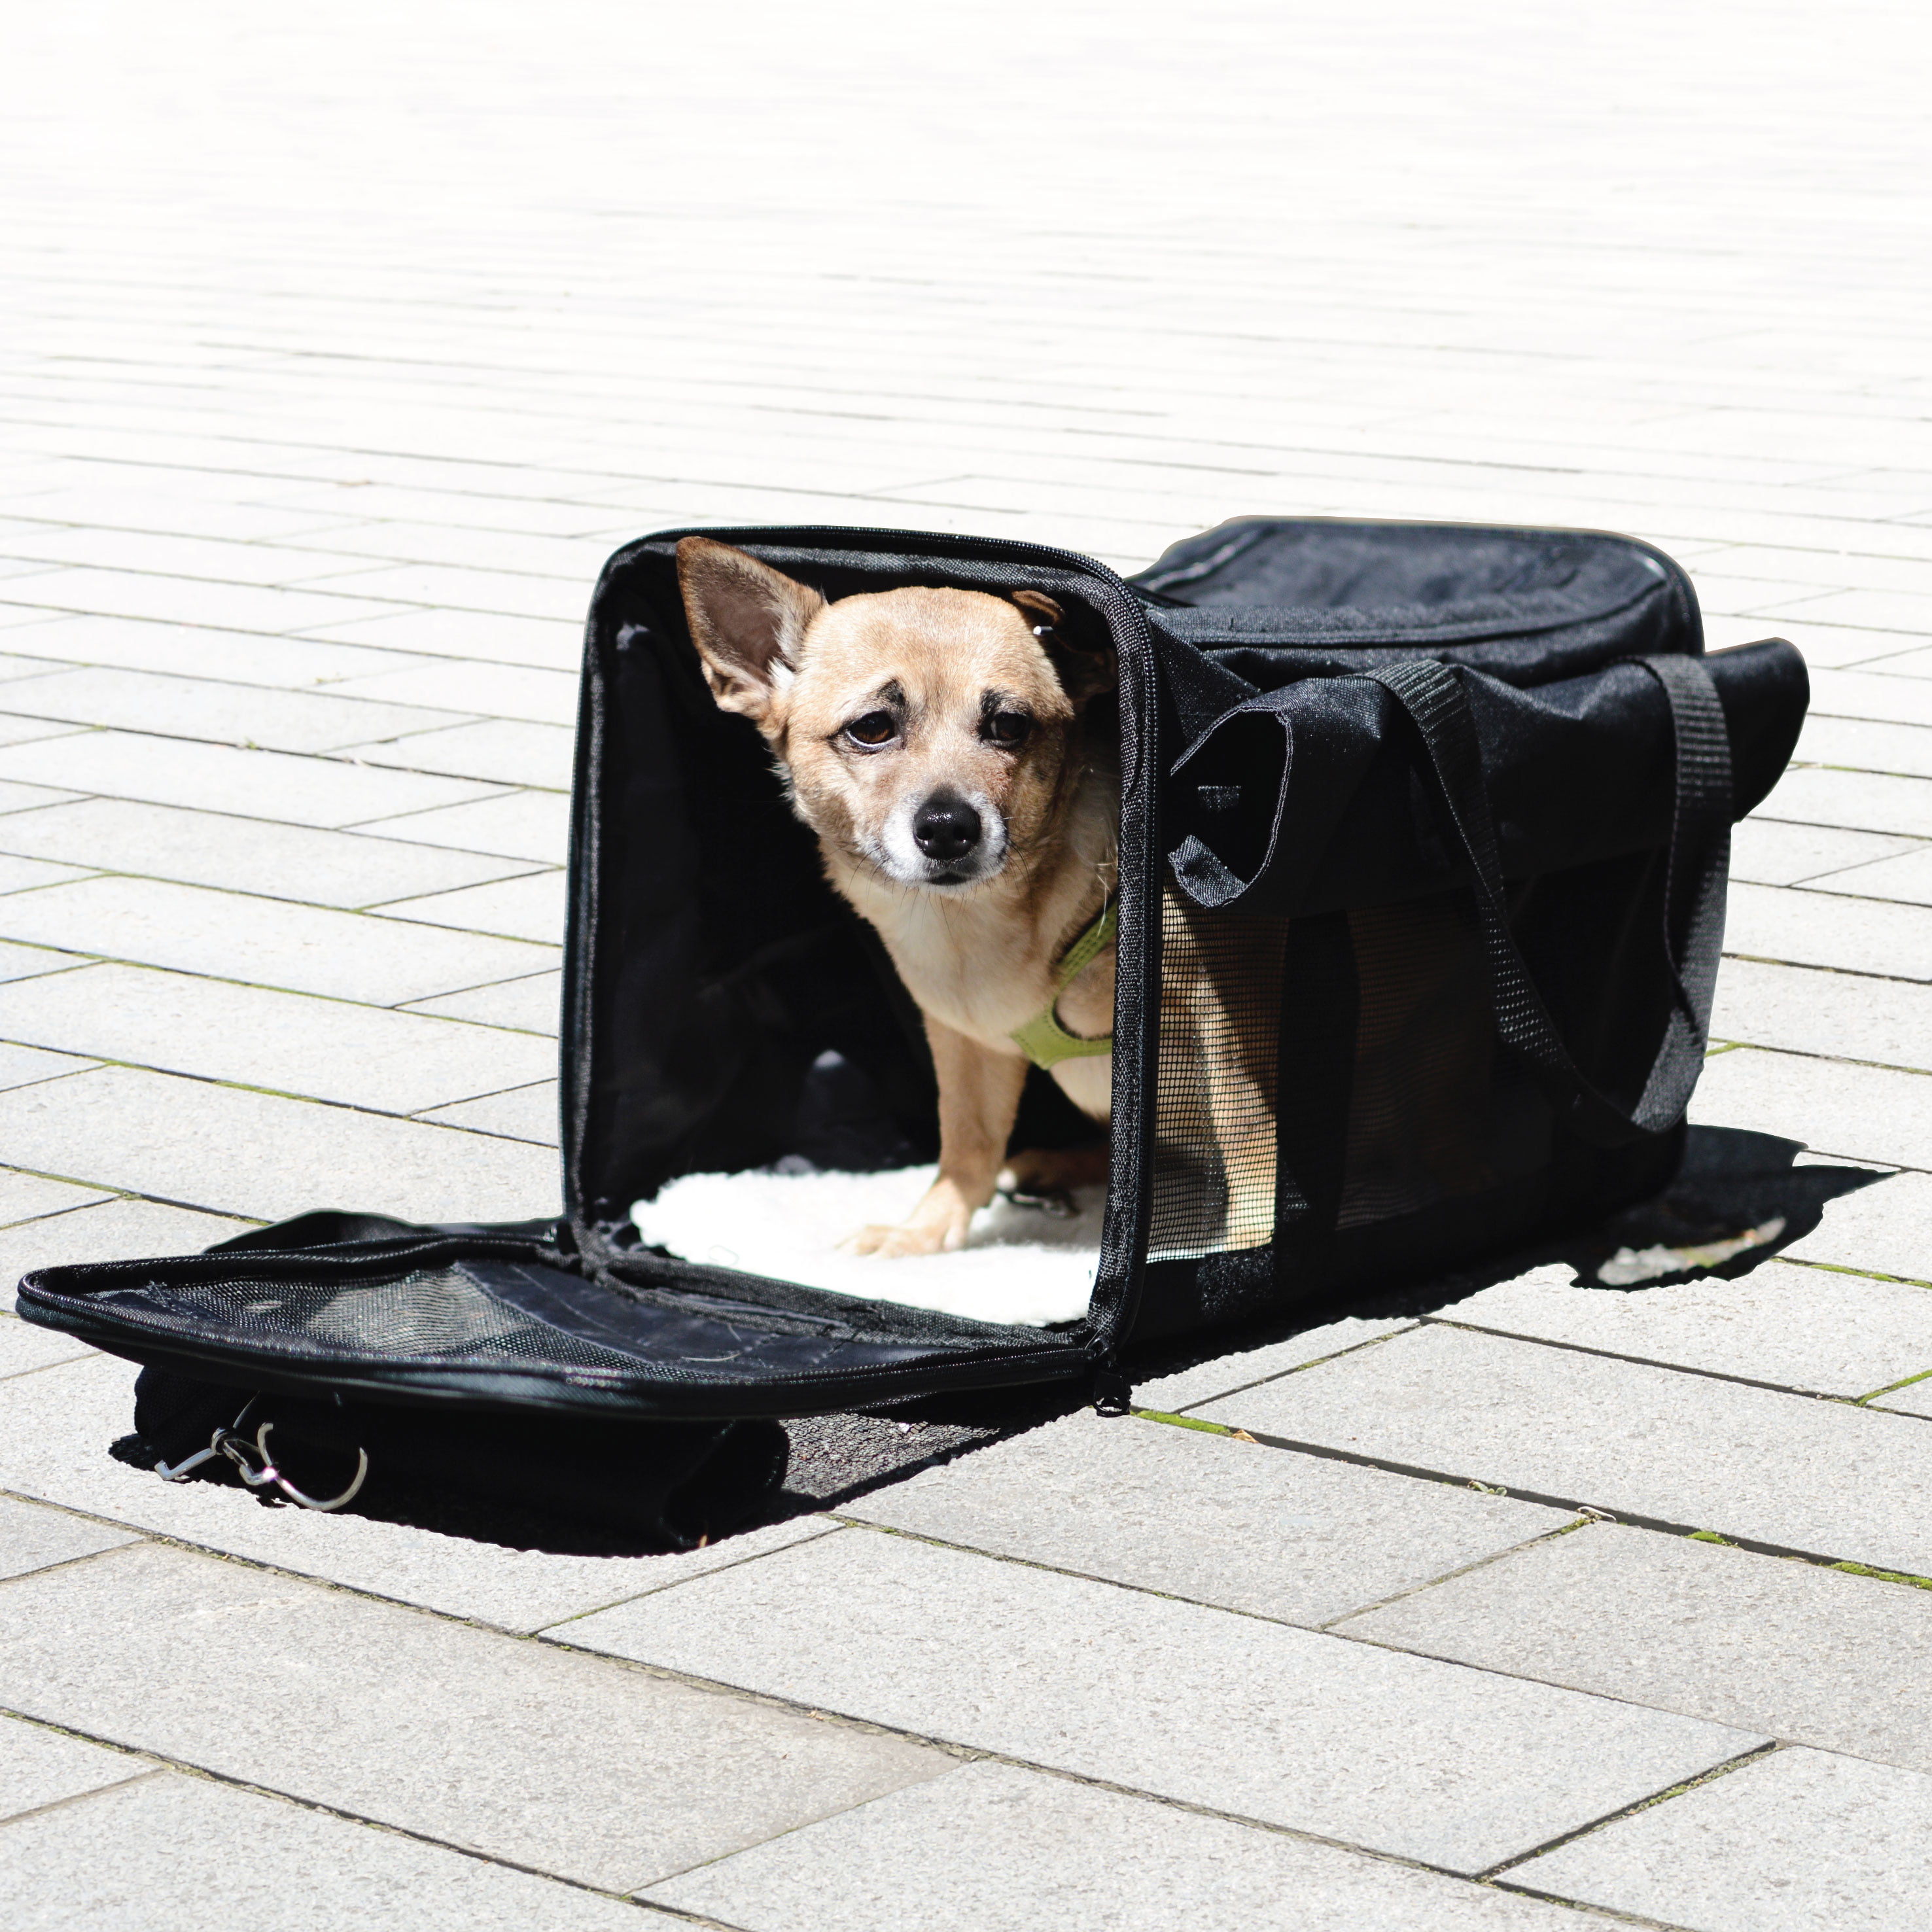 Airline Approved,20.8x10.2x14.1Travel Tote with Cozy and Soft Dog Bed,Portable,Collapsible,Travel Friendly Soft-Sided Large Pet Carrier 